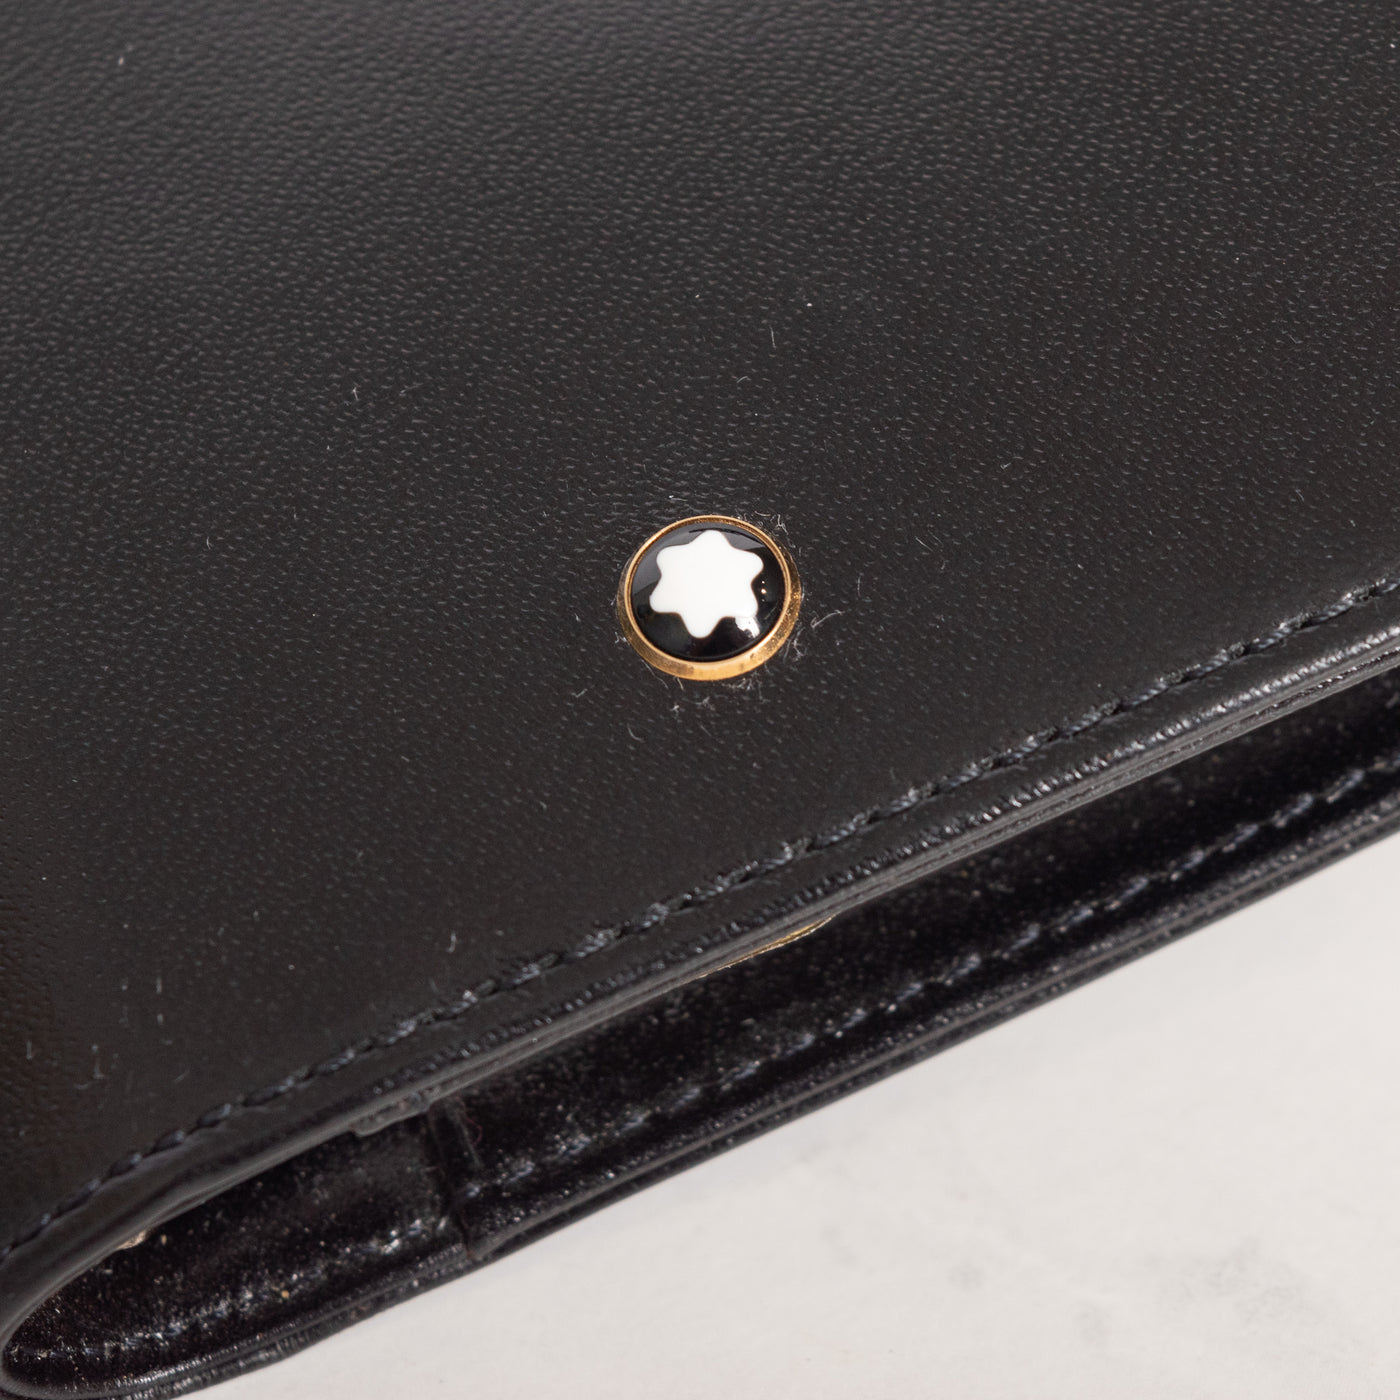 Montblanc Leather Goods Meisterstuck Small Black Leather Zip Around Organizer 14075 - Preowned